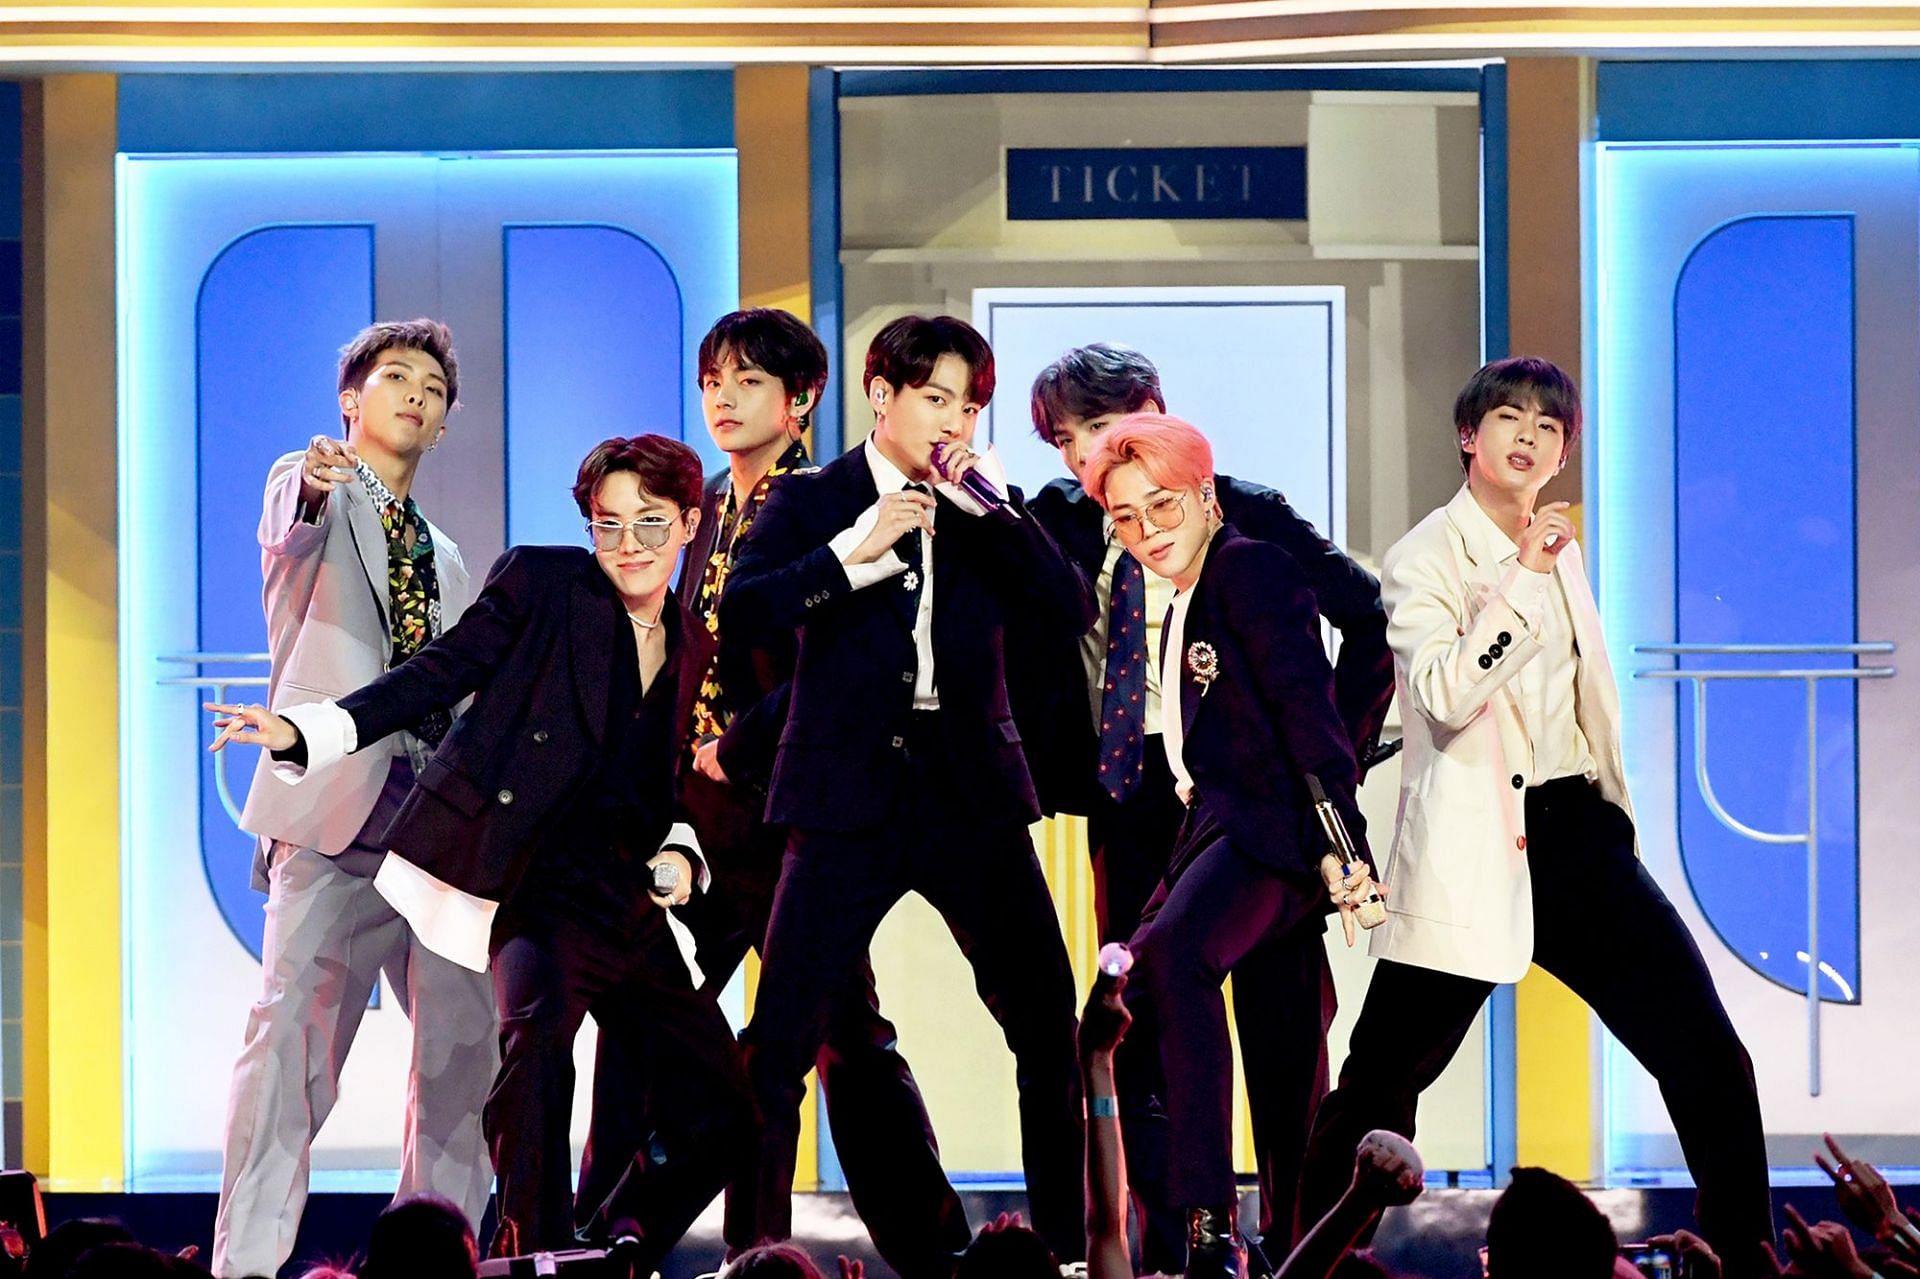 Top 5 Iconic Bts Performances Every Army Should Know